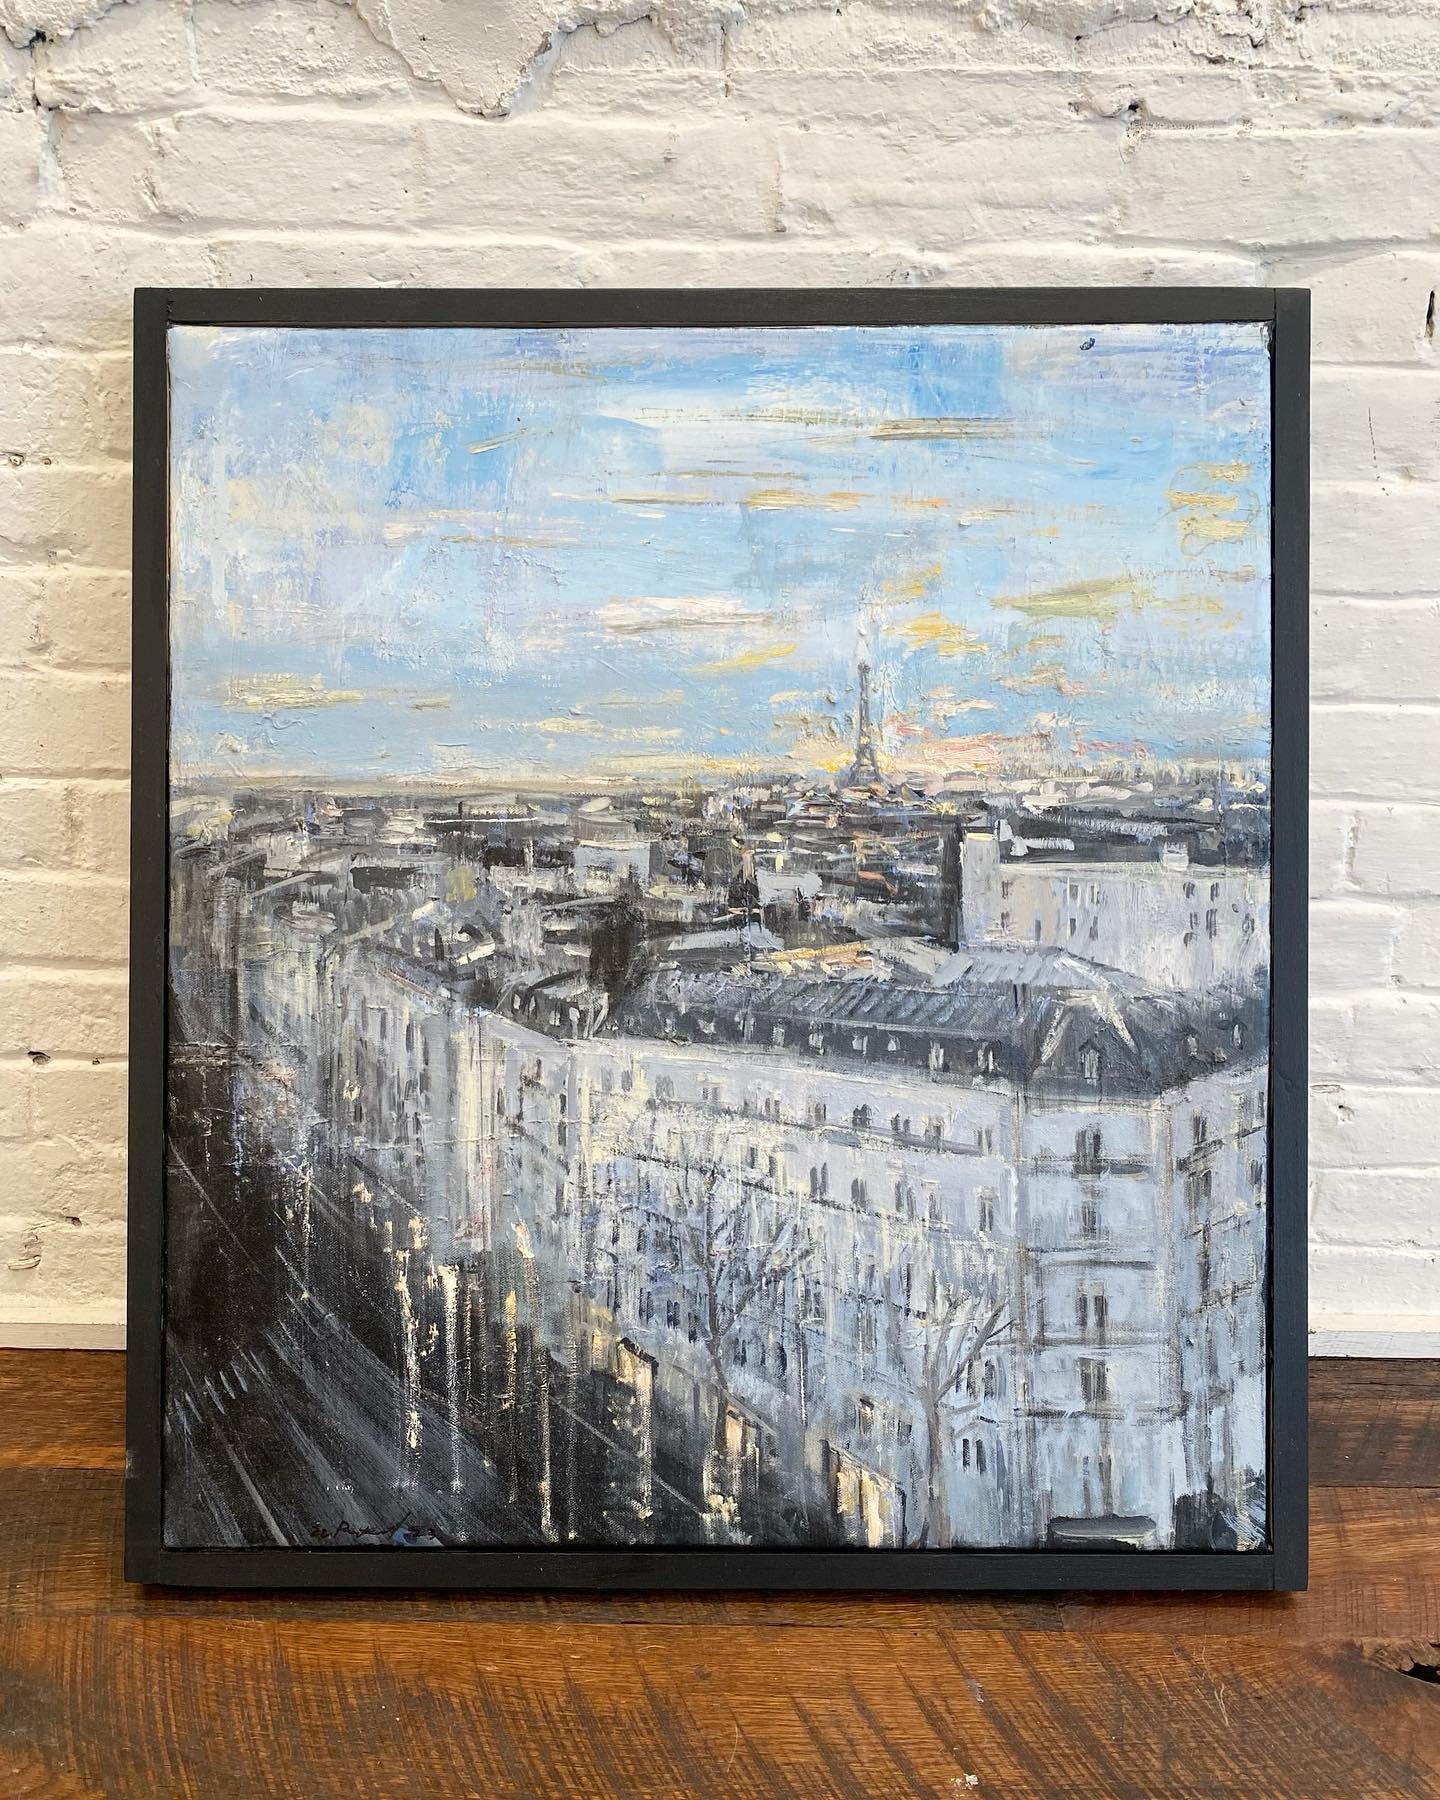 Paris rooftops for Greg&rsquo;s upcoming solo show. I met Greg almost 15 years ago in Philadelphia at an event @pafacademy was hosting. It was great to be back in Philly with him a week ago looking at his work for the show. #paris #painting #gregoryp